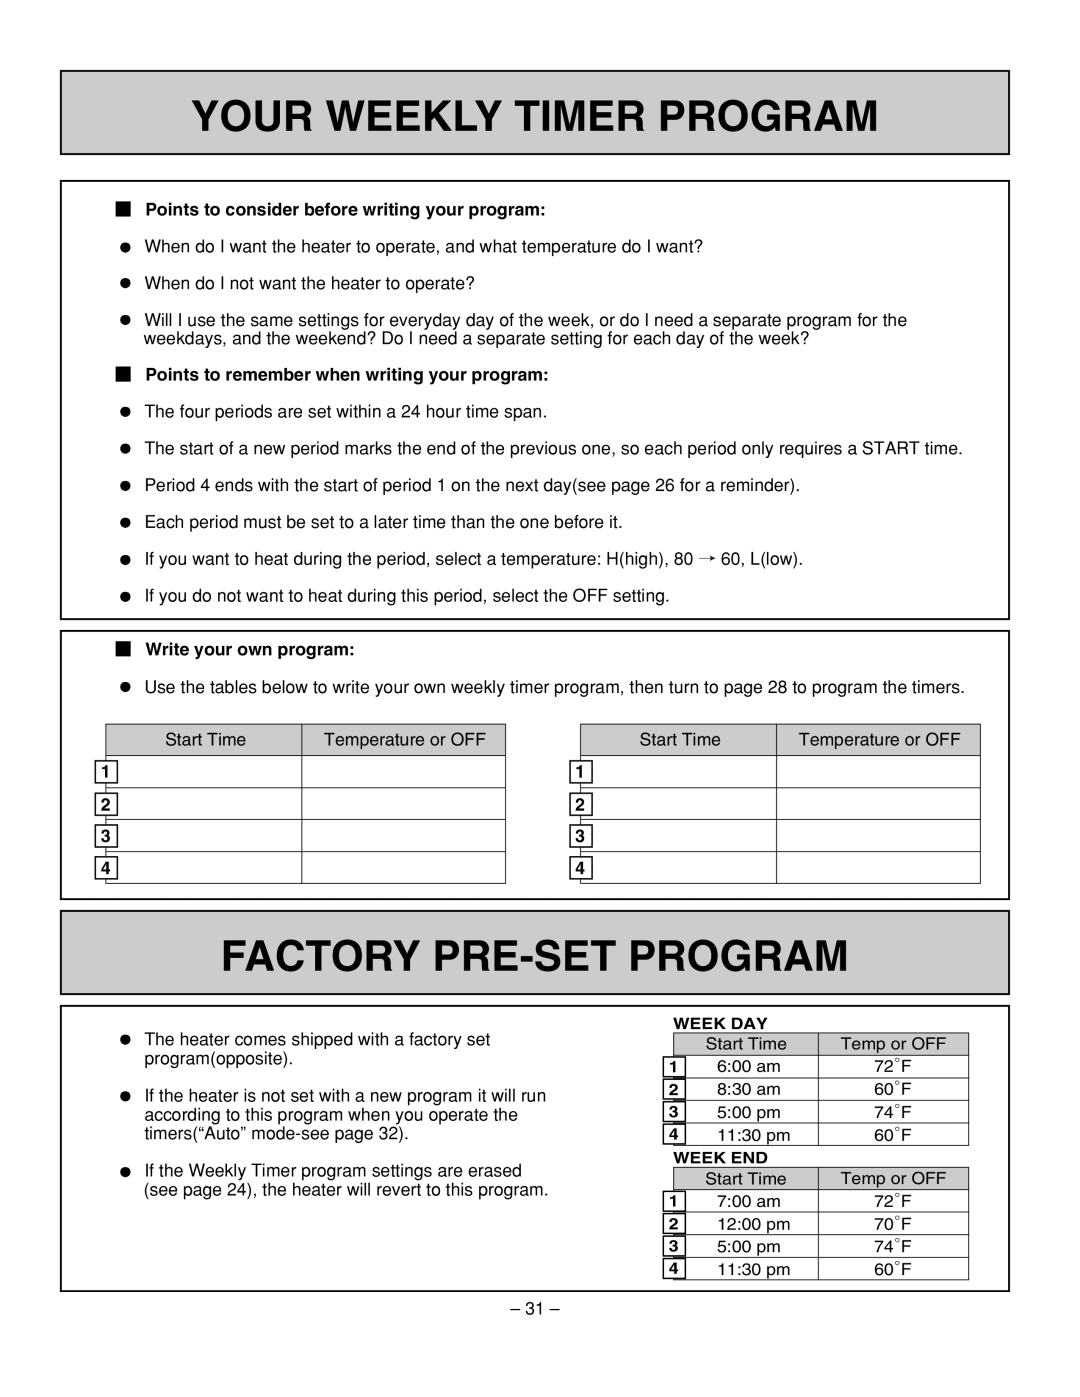 Rinnai RHFE-431WTA Your Weekly Timer Program, Factory Pre-Setprogram, Points to consider before writing your program, 1 2 